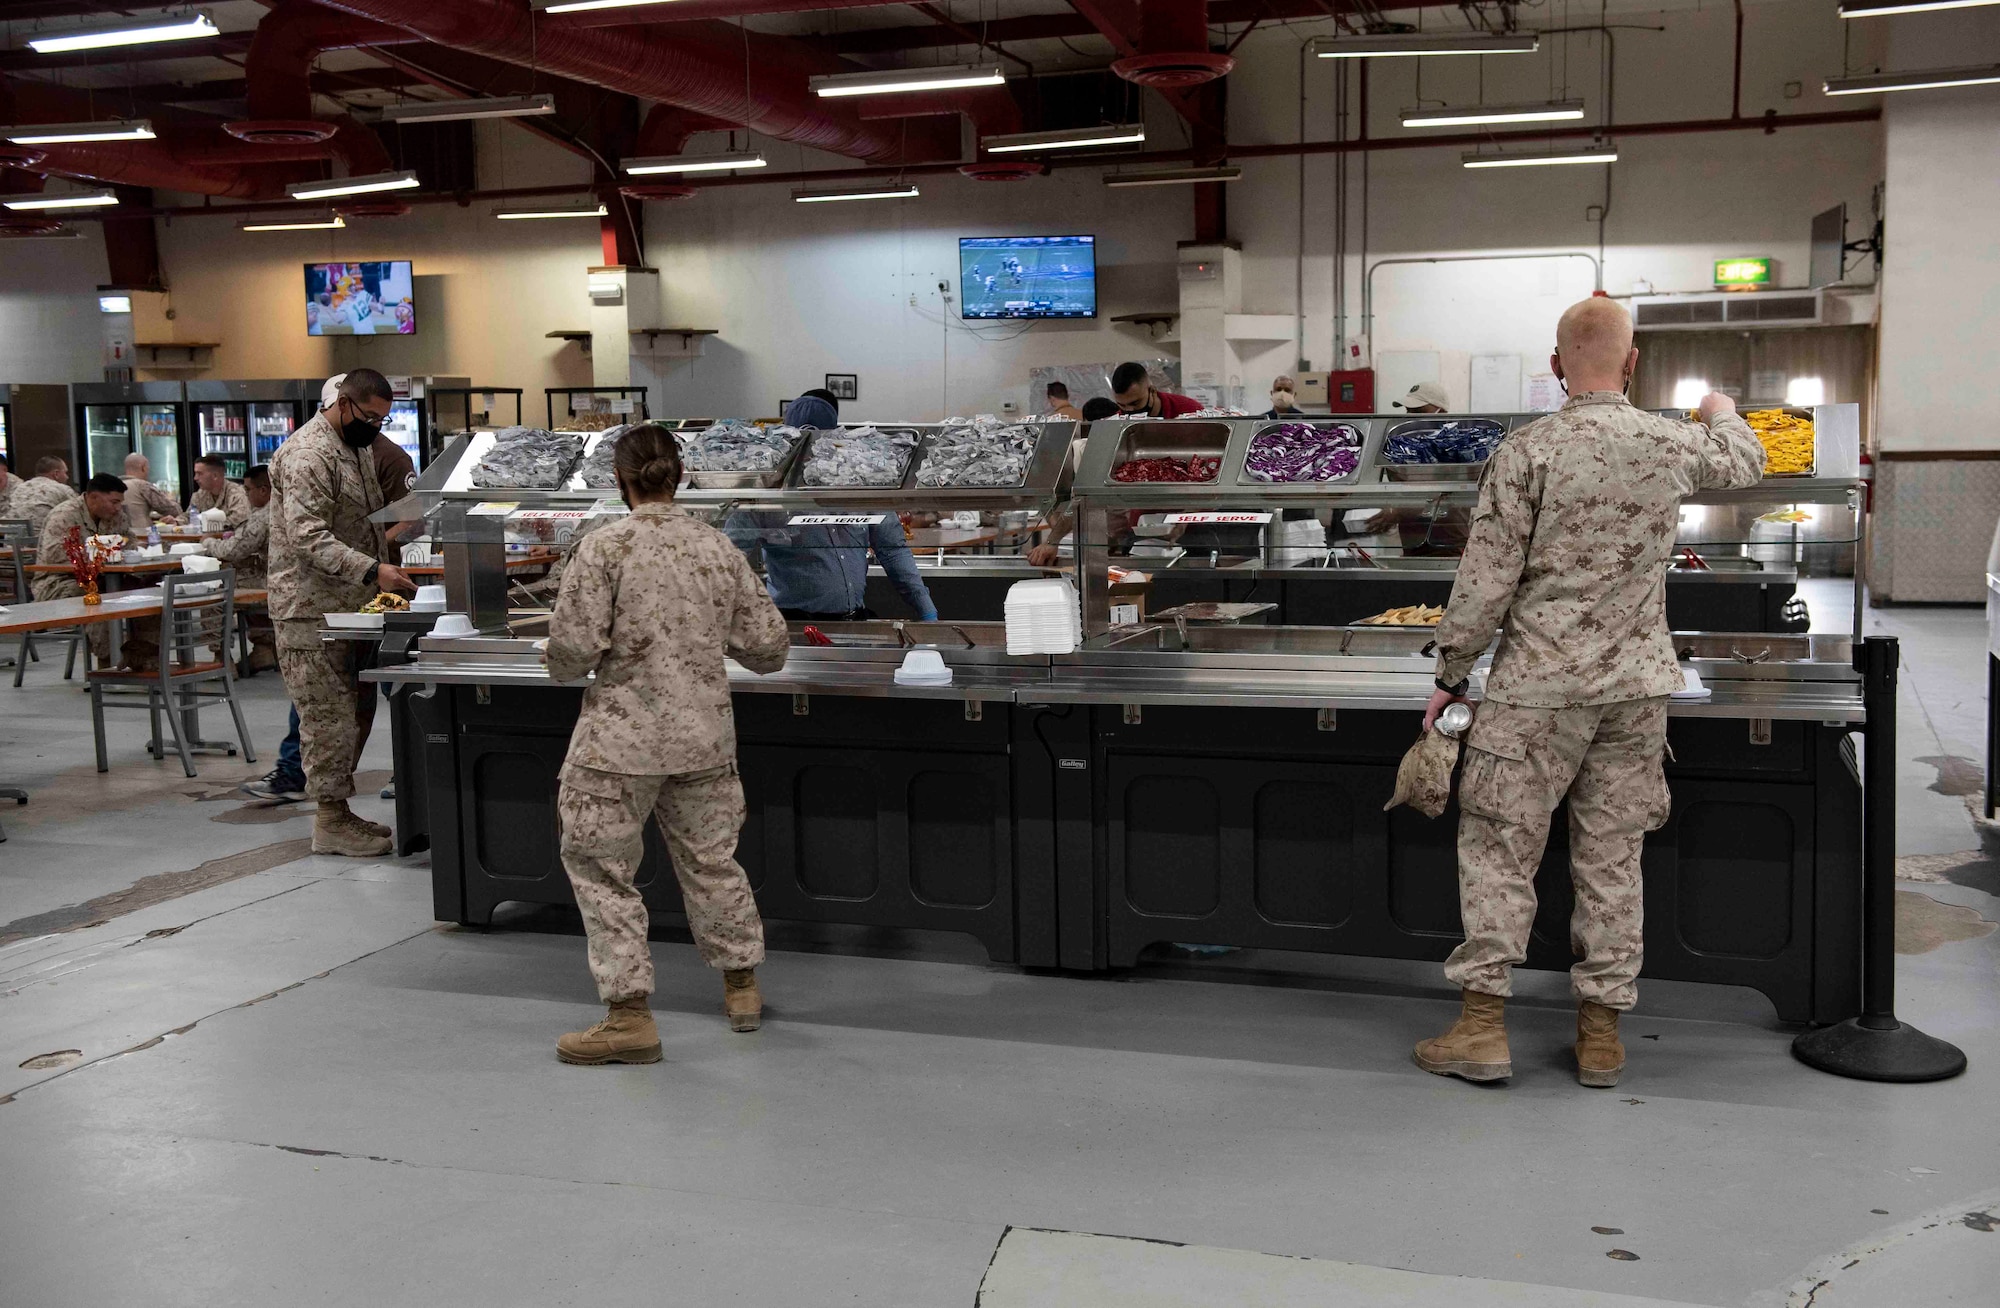 U.S. Marines serve themselves lunch in the dining facility at Ahmed Al Jaber Air Base, Kuwait, Nov. 6, 2020.